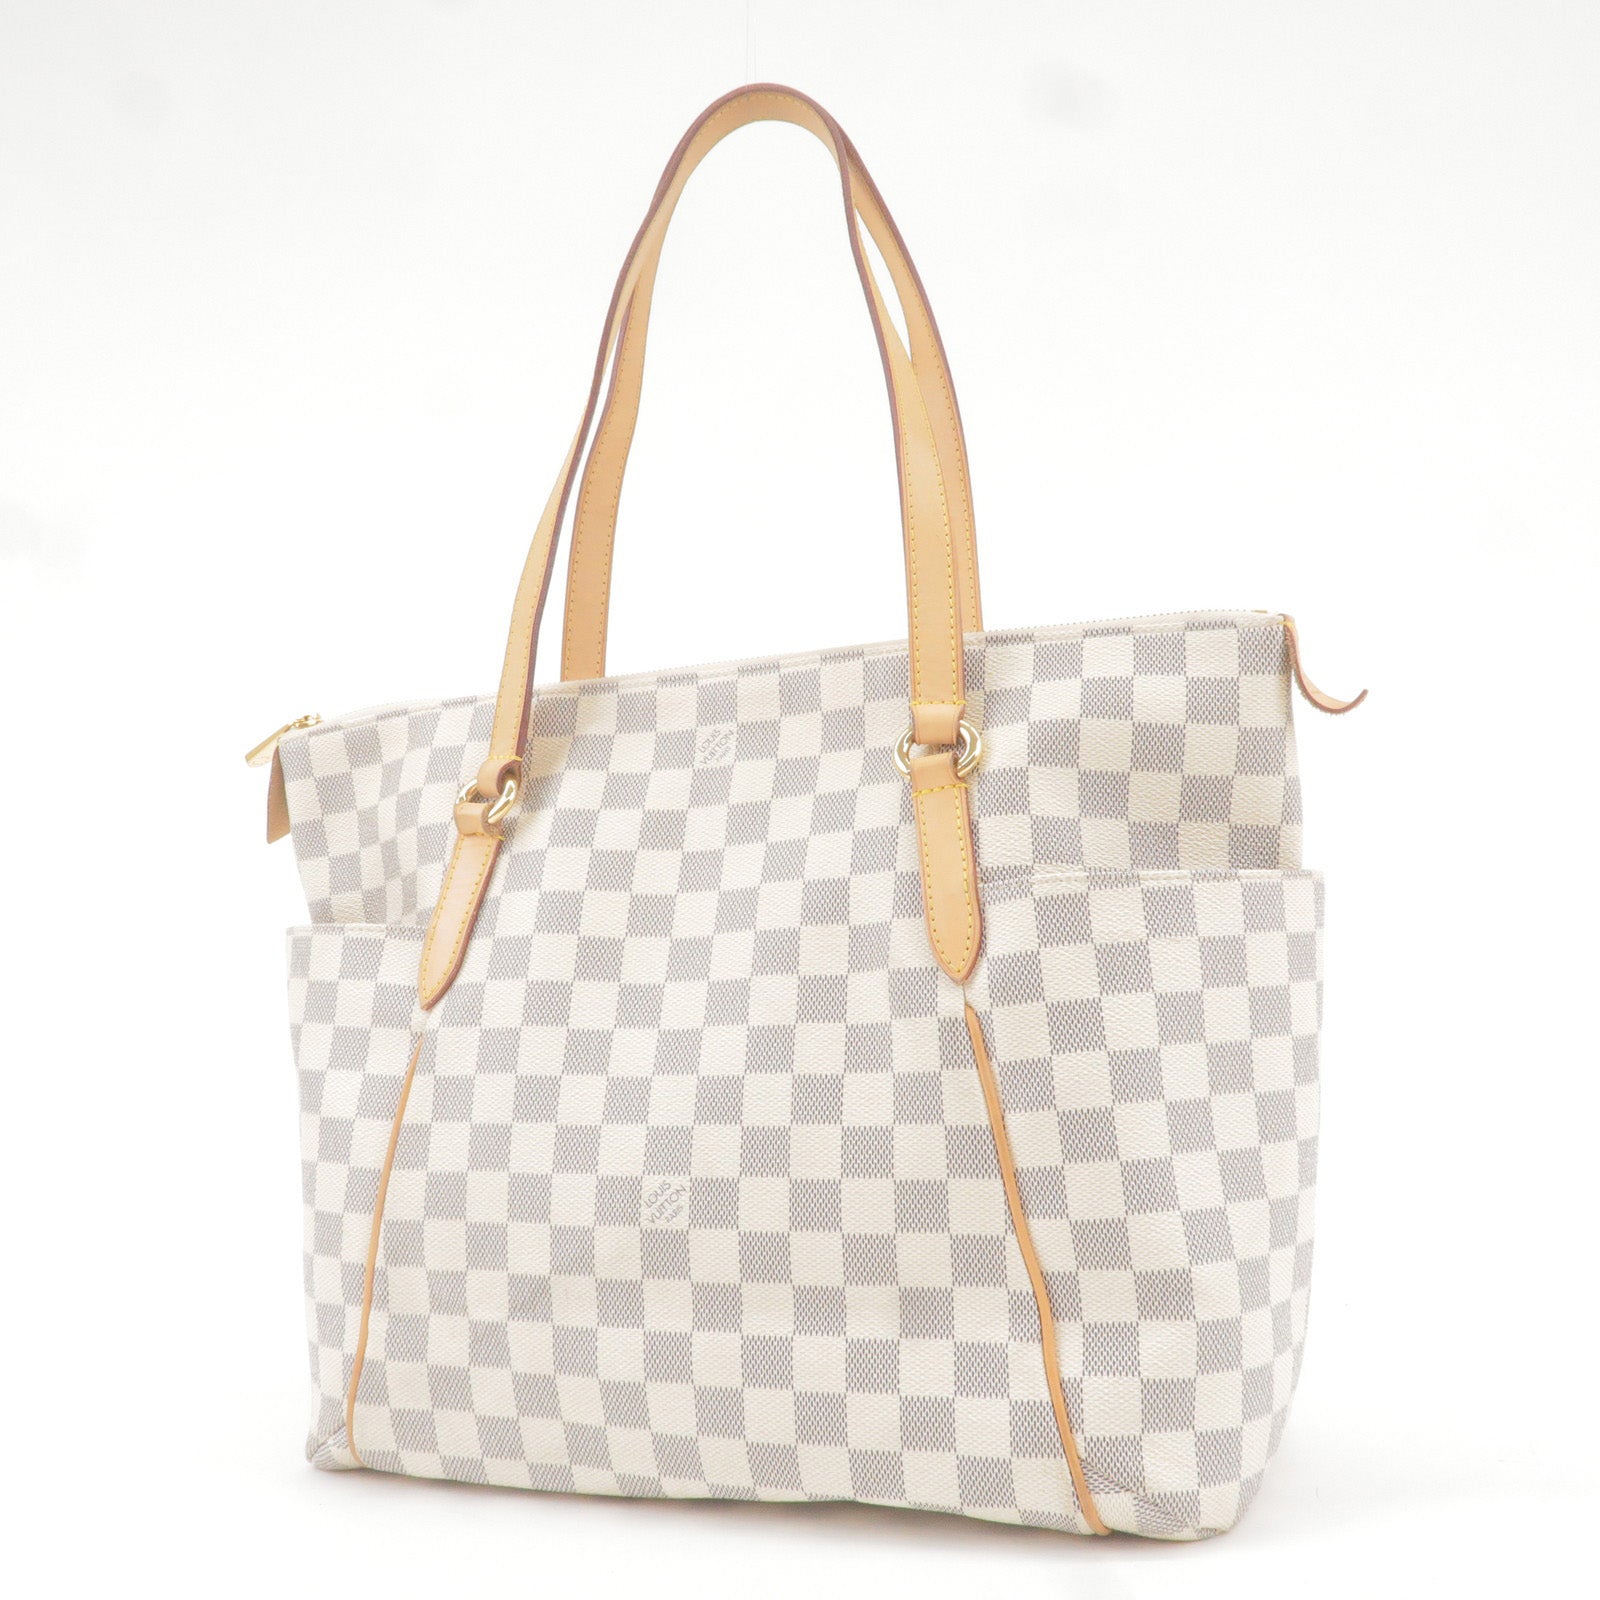 N51262 – dct - ep_vintage luxury Store - Tote - Totally - Damier - Vuitton  - Bag - A new version of Nicolas Ghesquières first bag for Louis Vuitton -  Louis - MM - Azur